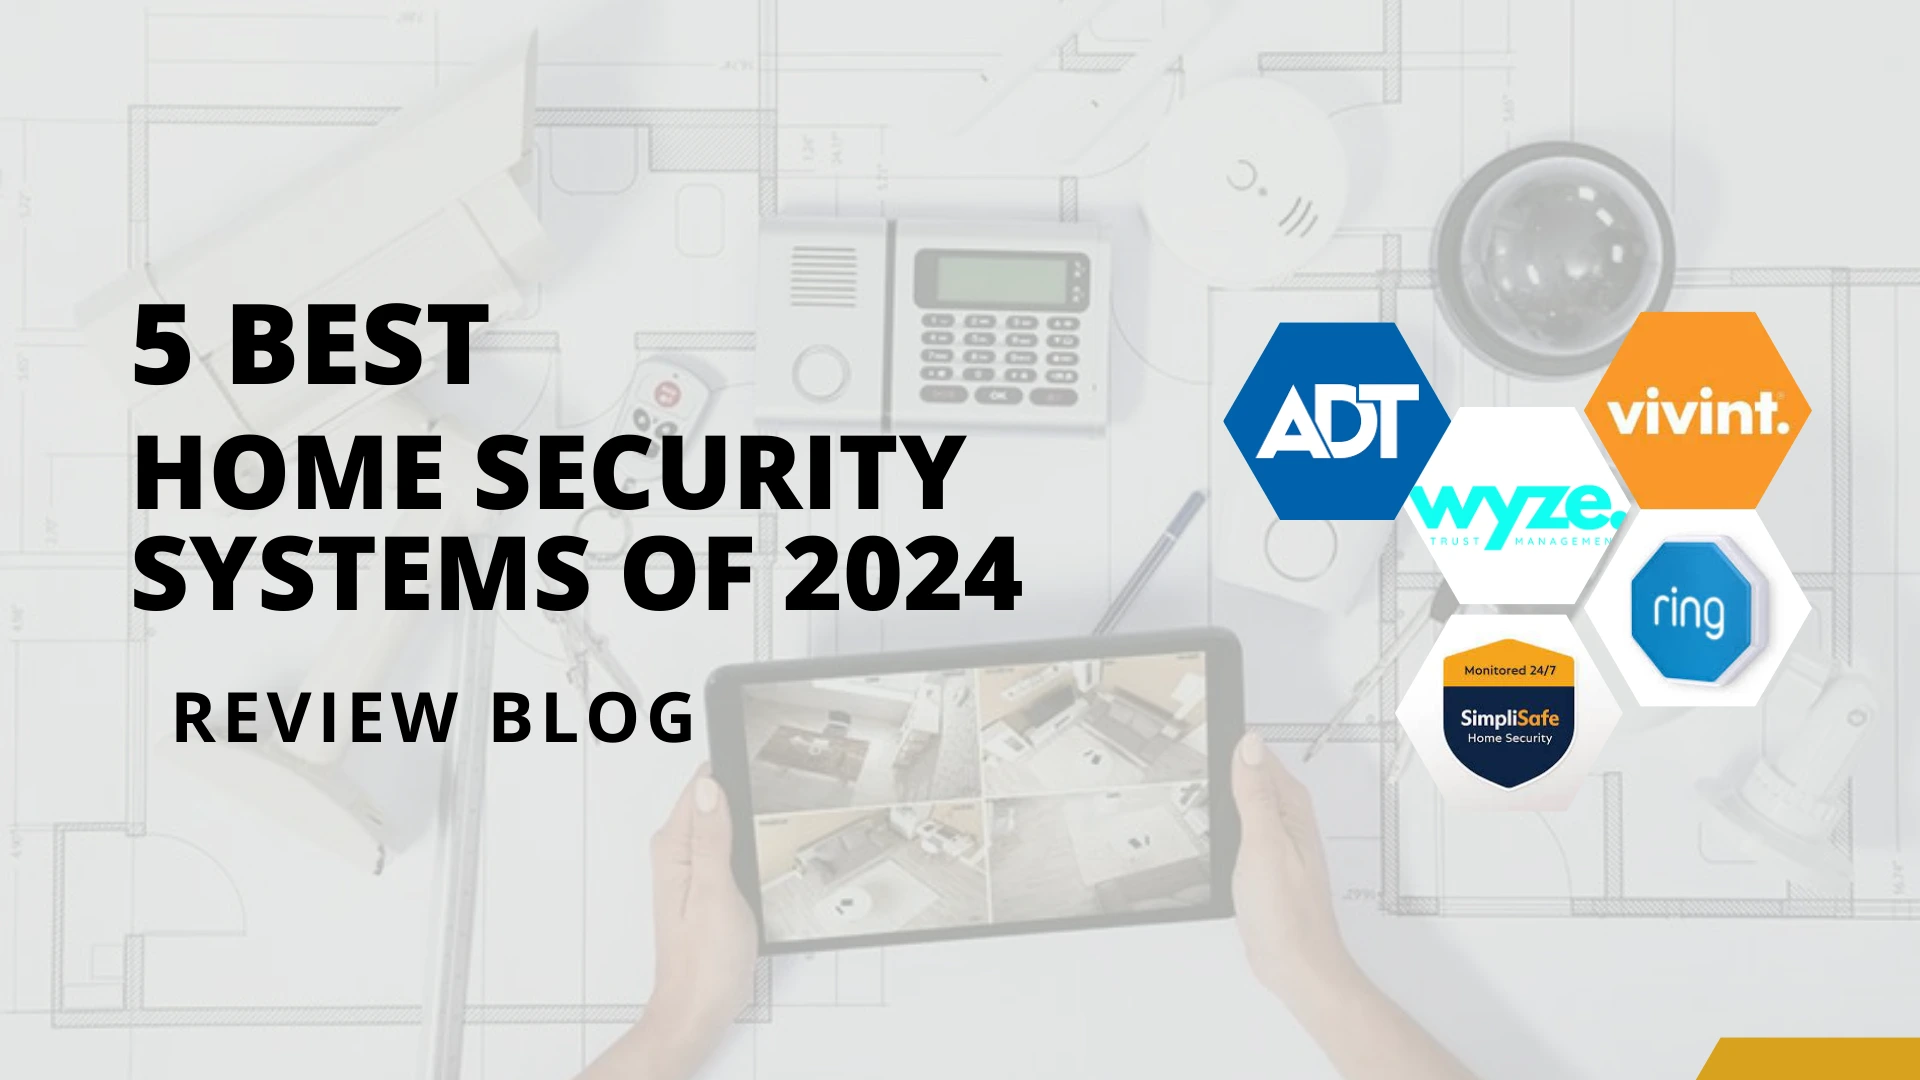 5 Best Home Security Systems of 2024